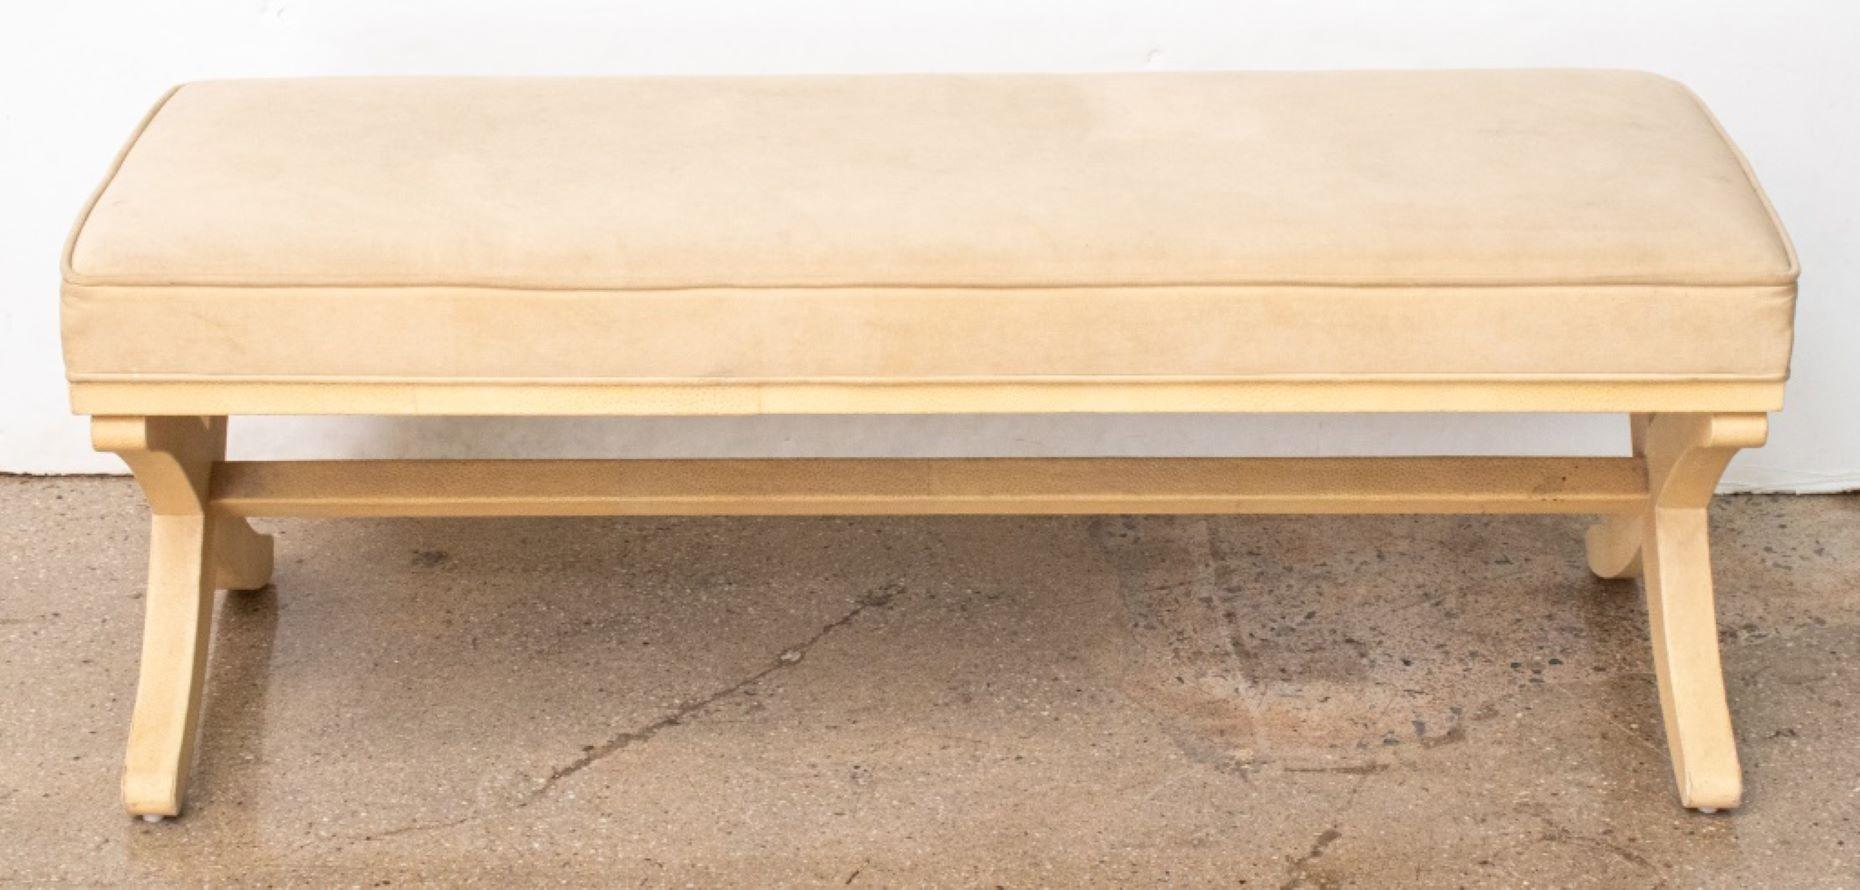 R & Y Augousti, Paris Art Deco style cream colored shagreen-veneered bench with upholstered seat. 17